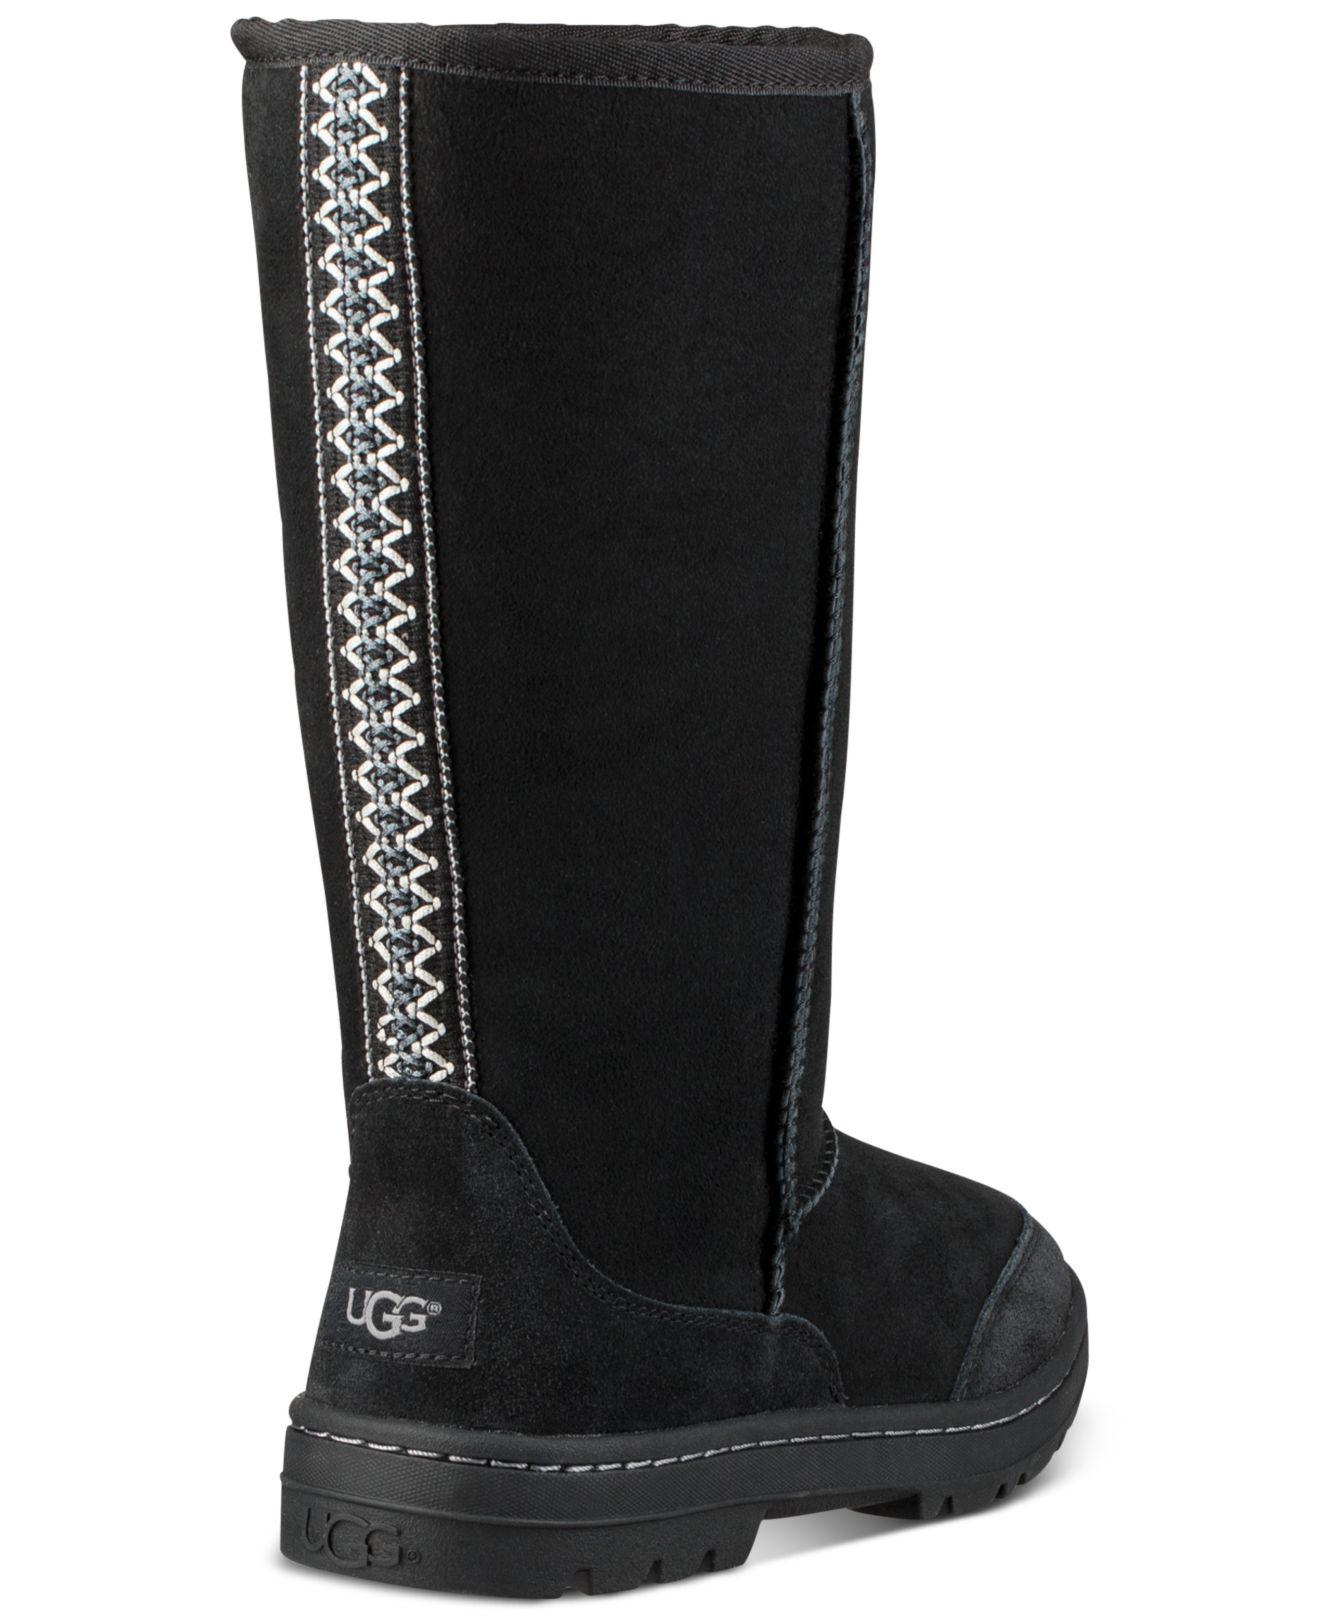 UGG Fur Ultra Tall Revival Boots in Black - Lyst